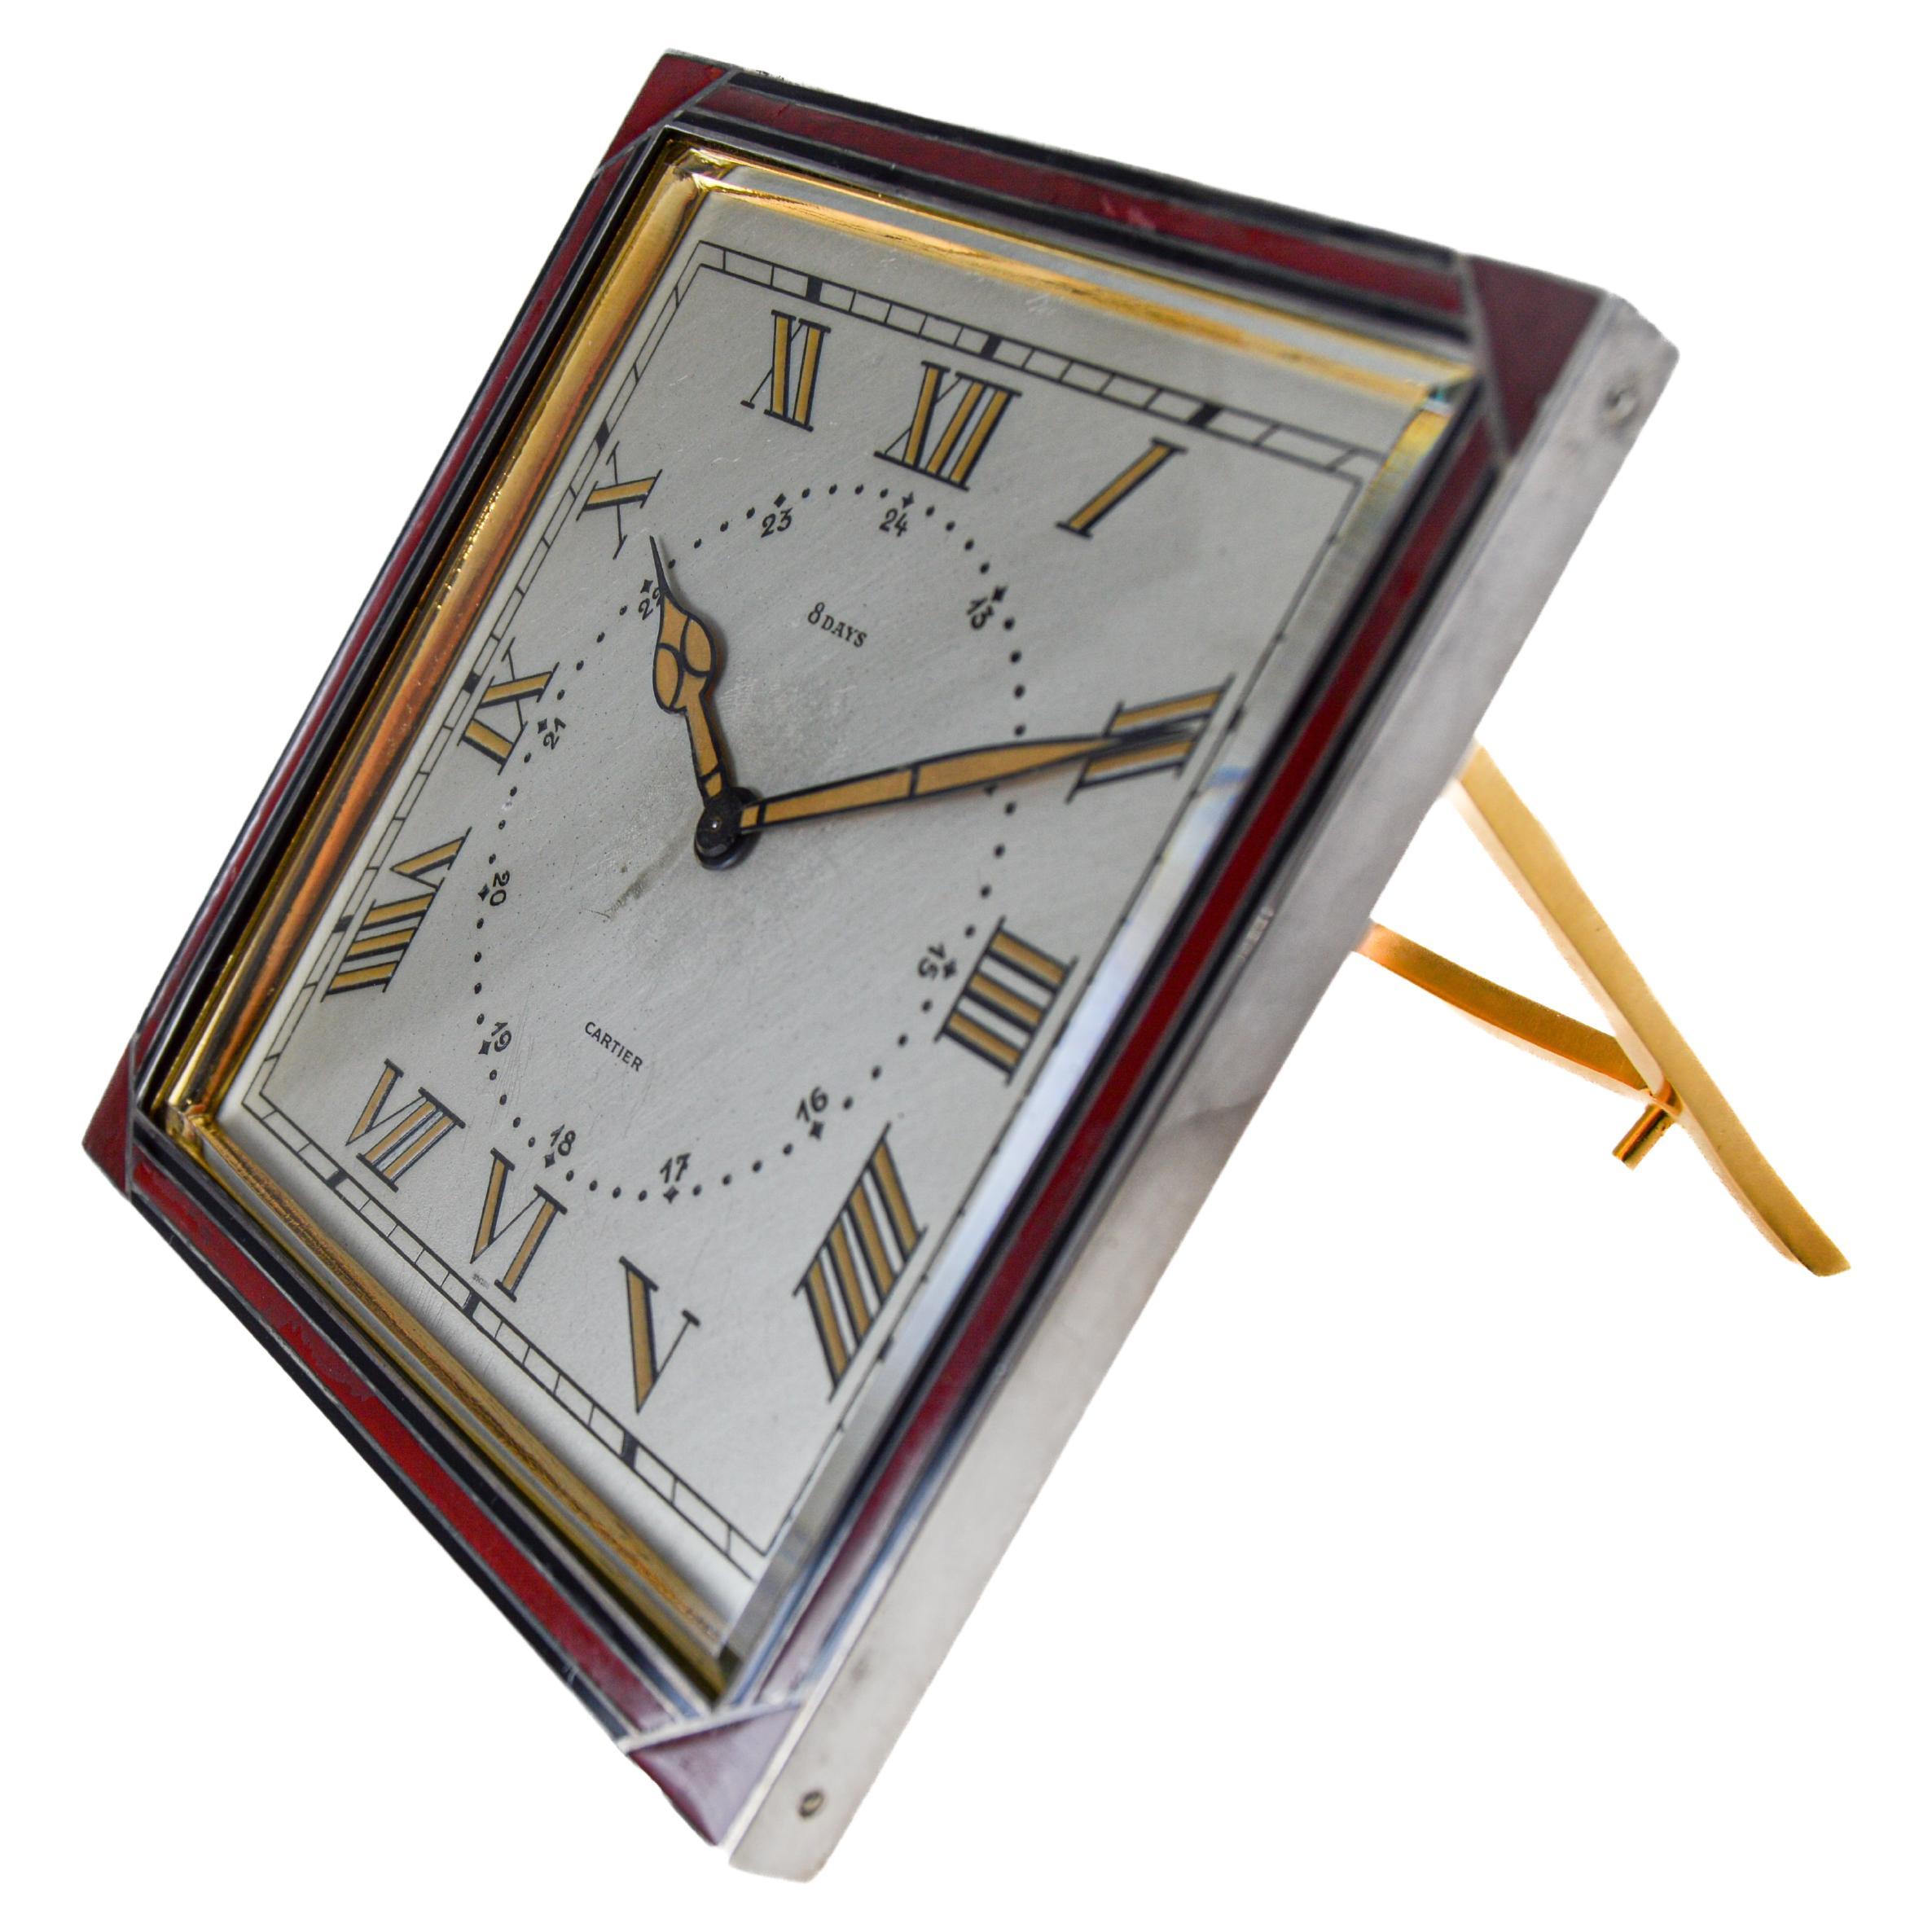 Cartier Sterling and Enamel Art Deco Desk Clock with Breguet Engine Turned Dial For Sale 1